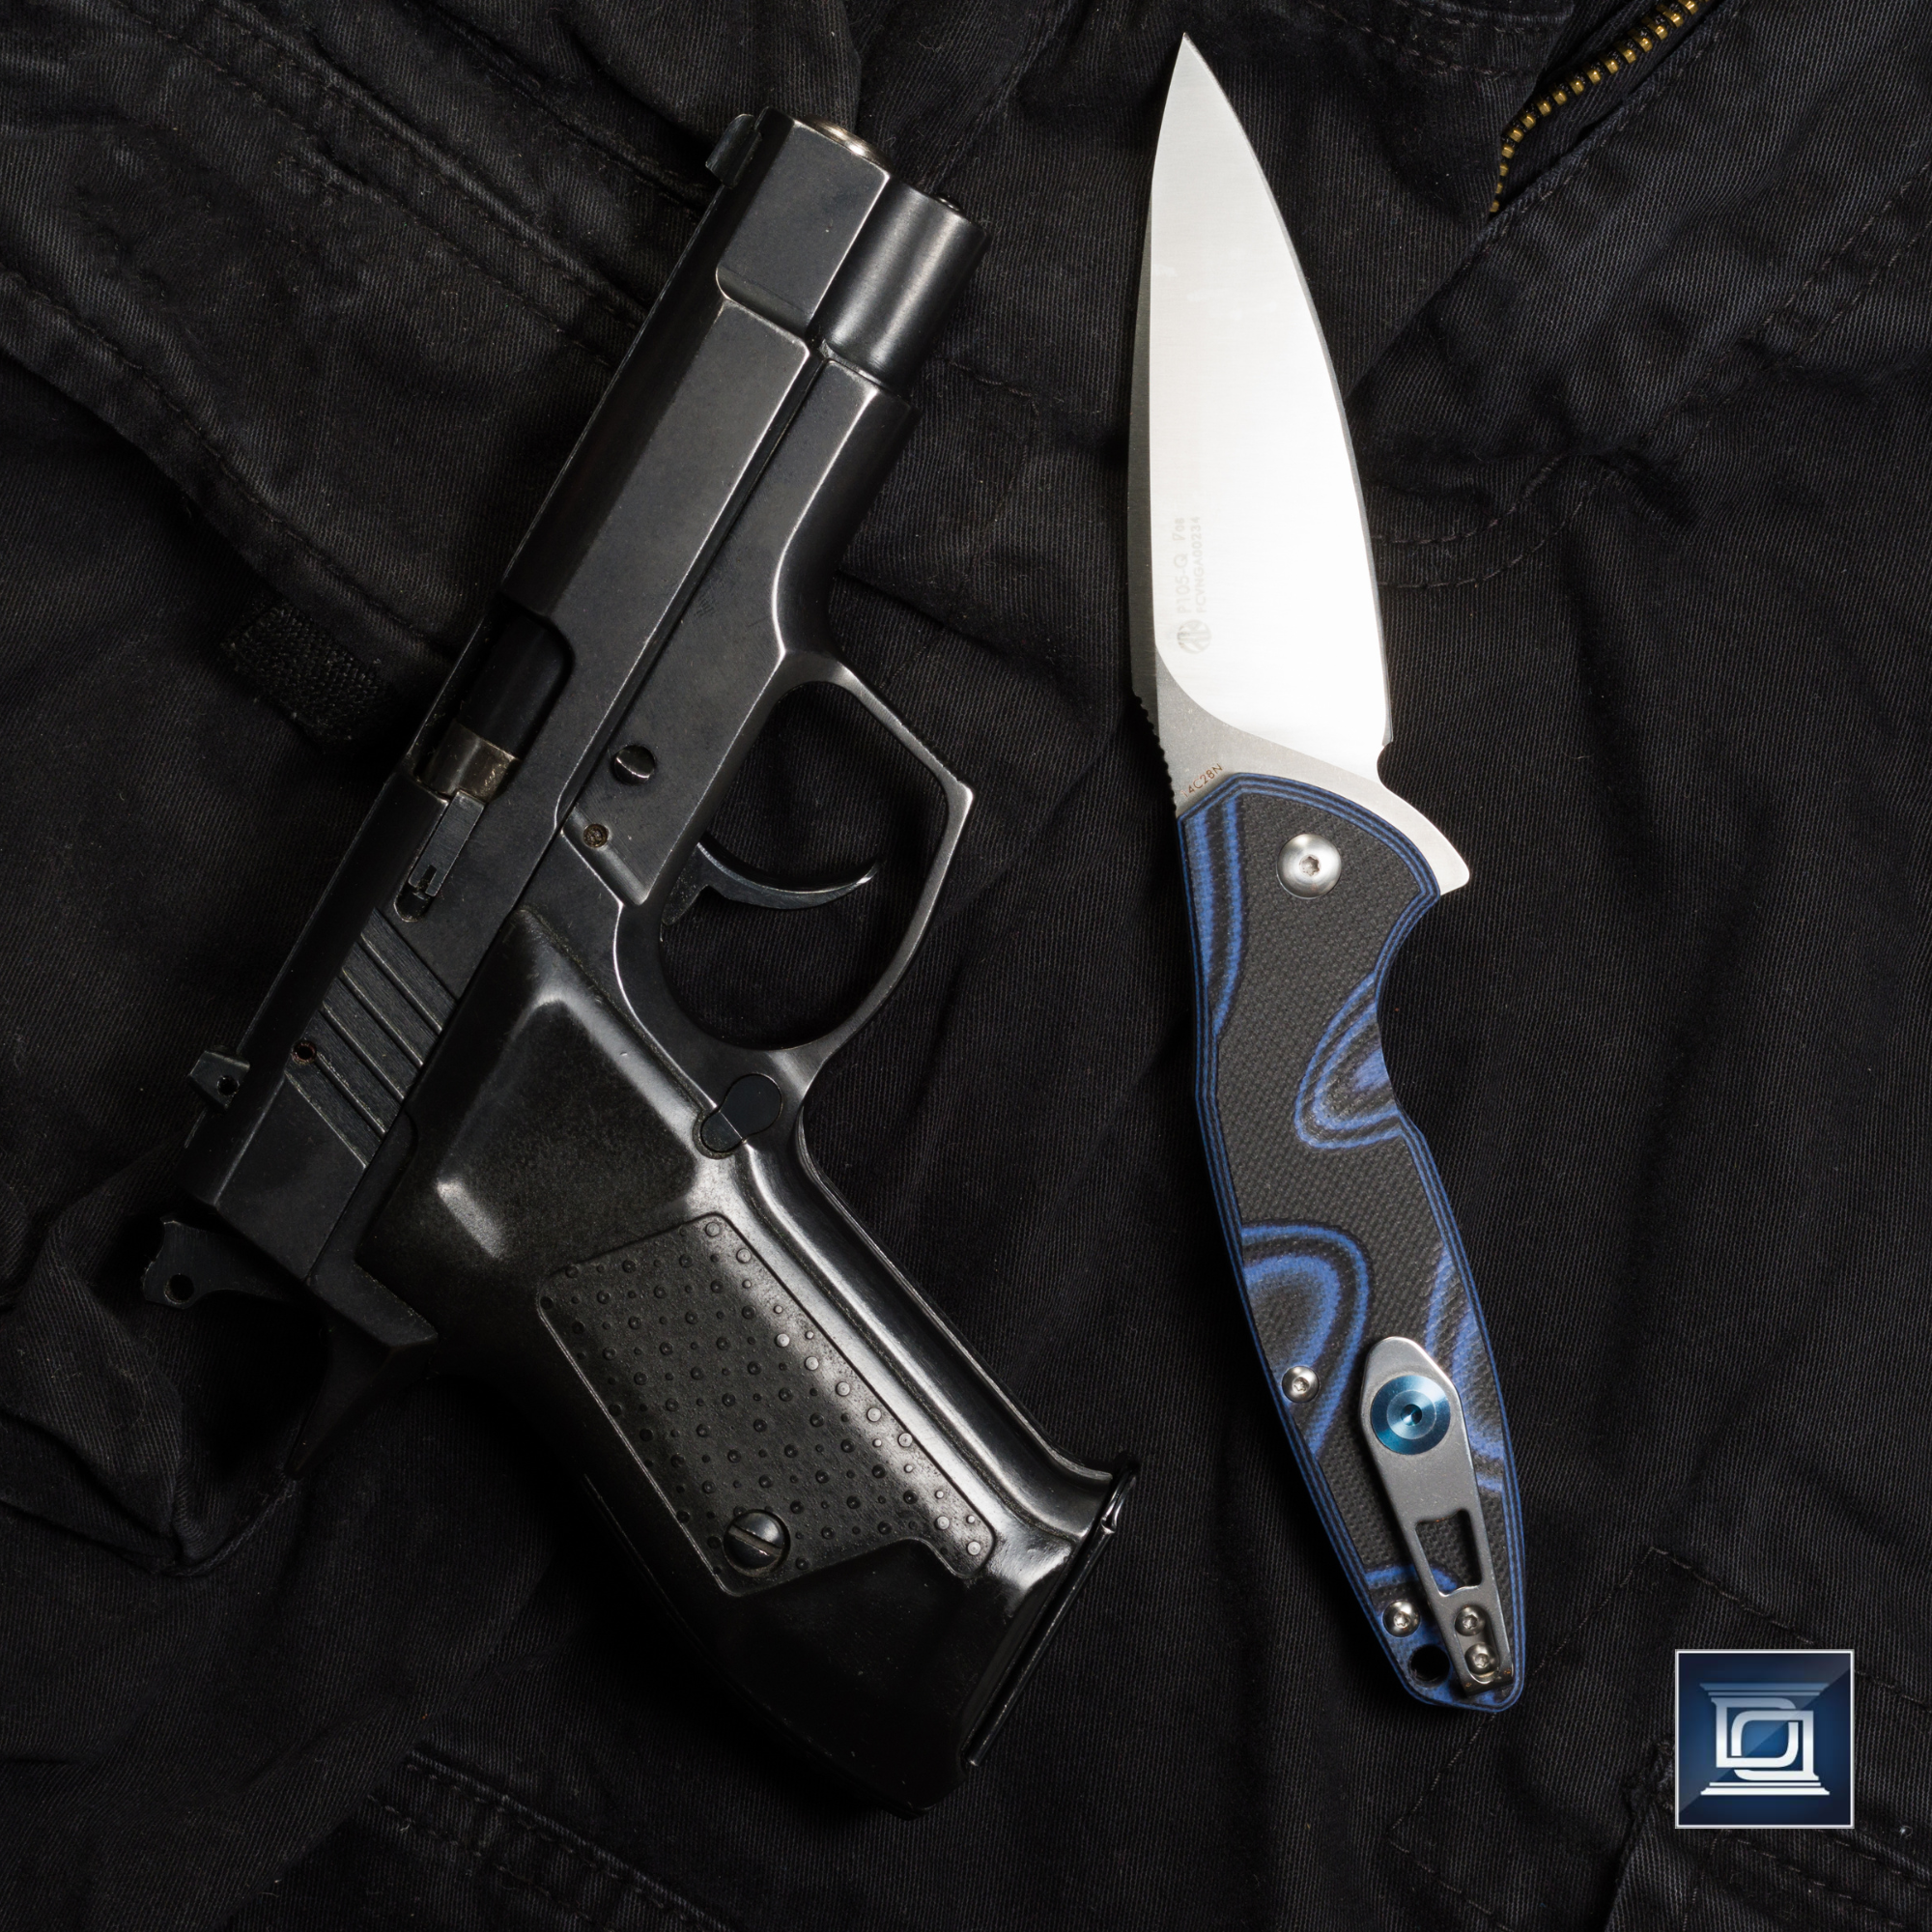 illegal pistol and pocket knife confiscated during weapons offences arrest in BC